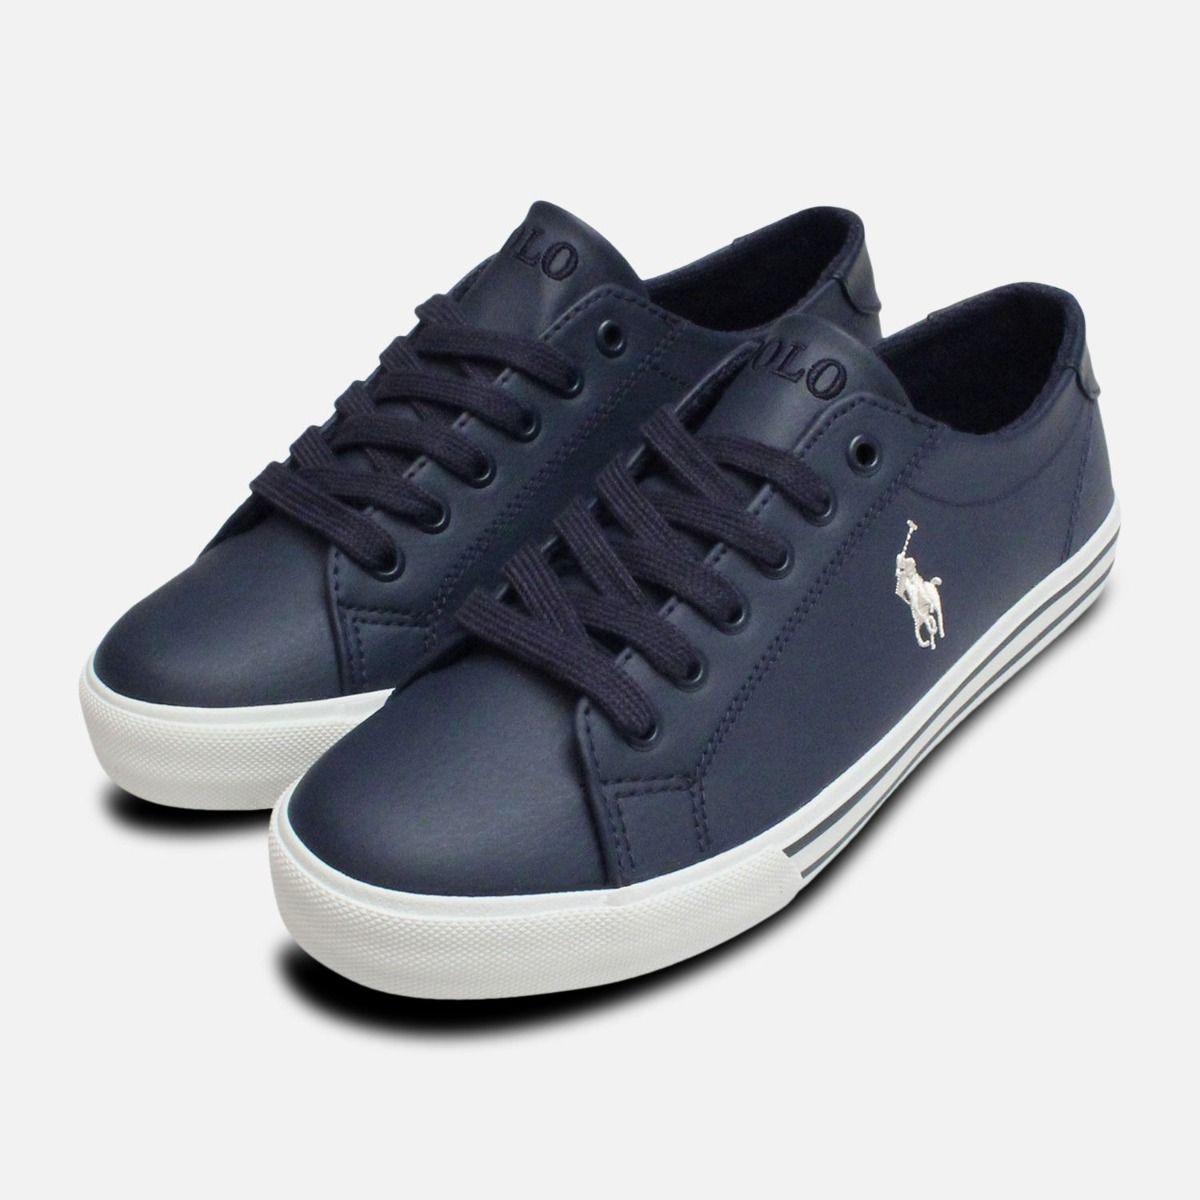 navy blue polo shoes - 62% OFF 